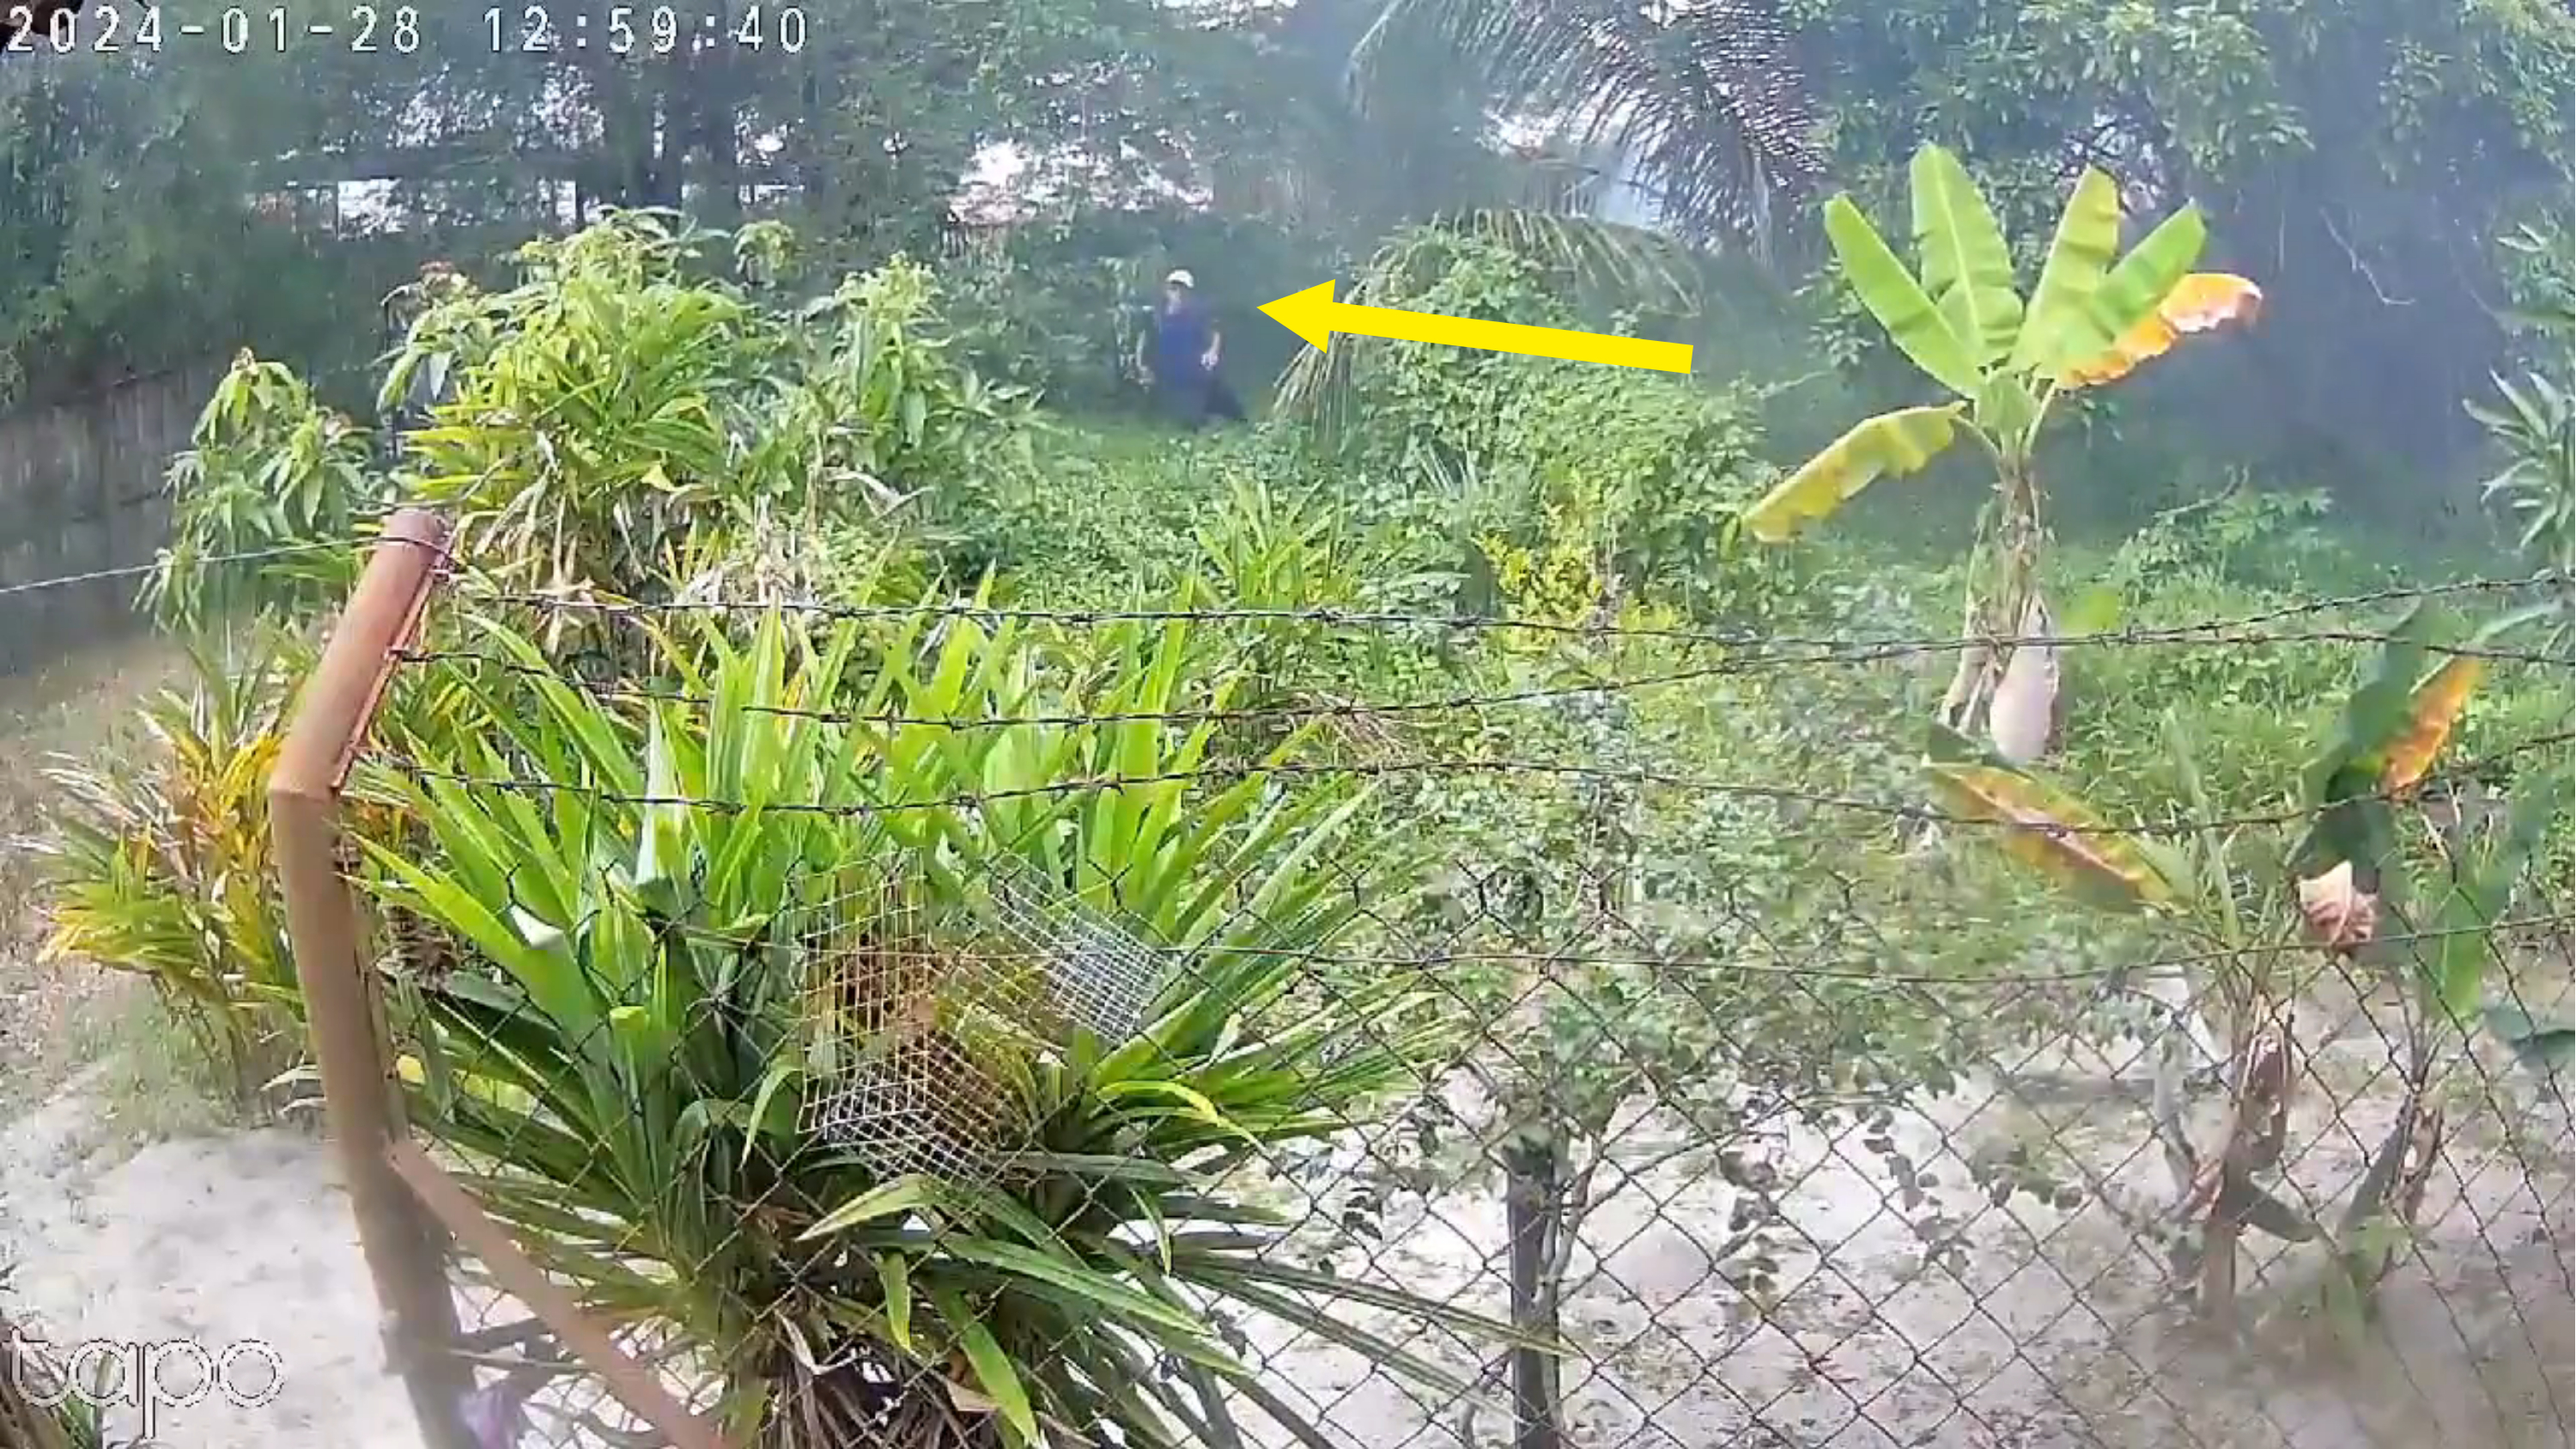 Person in distance behind a fence with plants, surveillance timestamp in corner